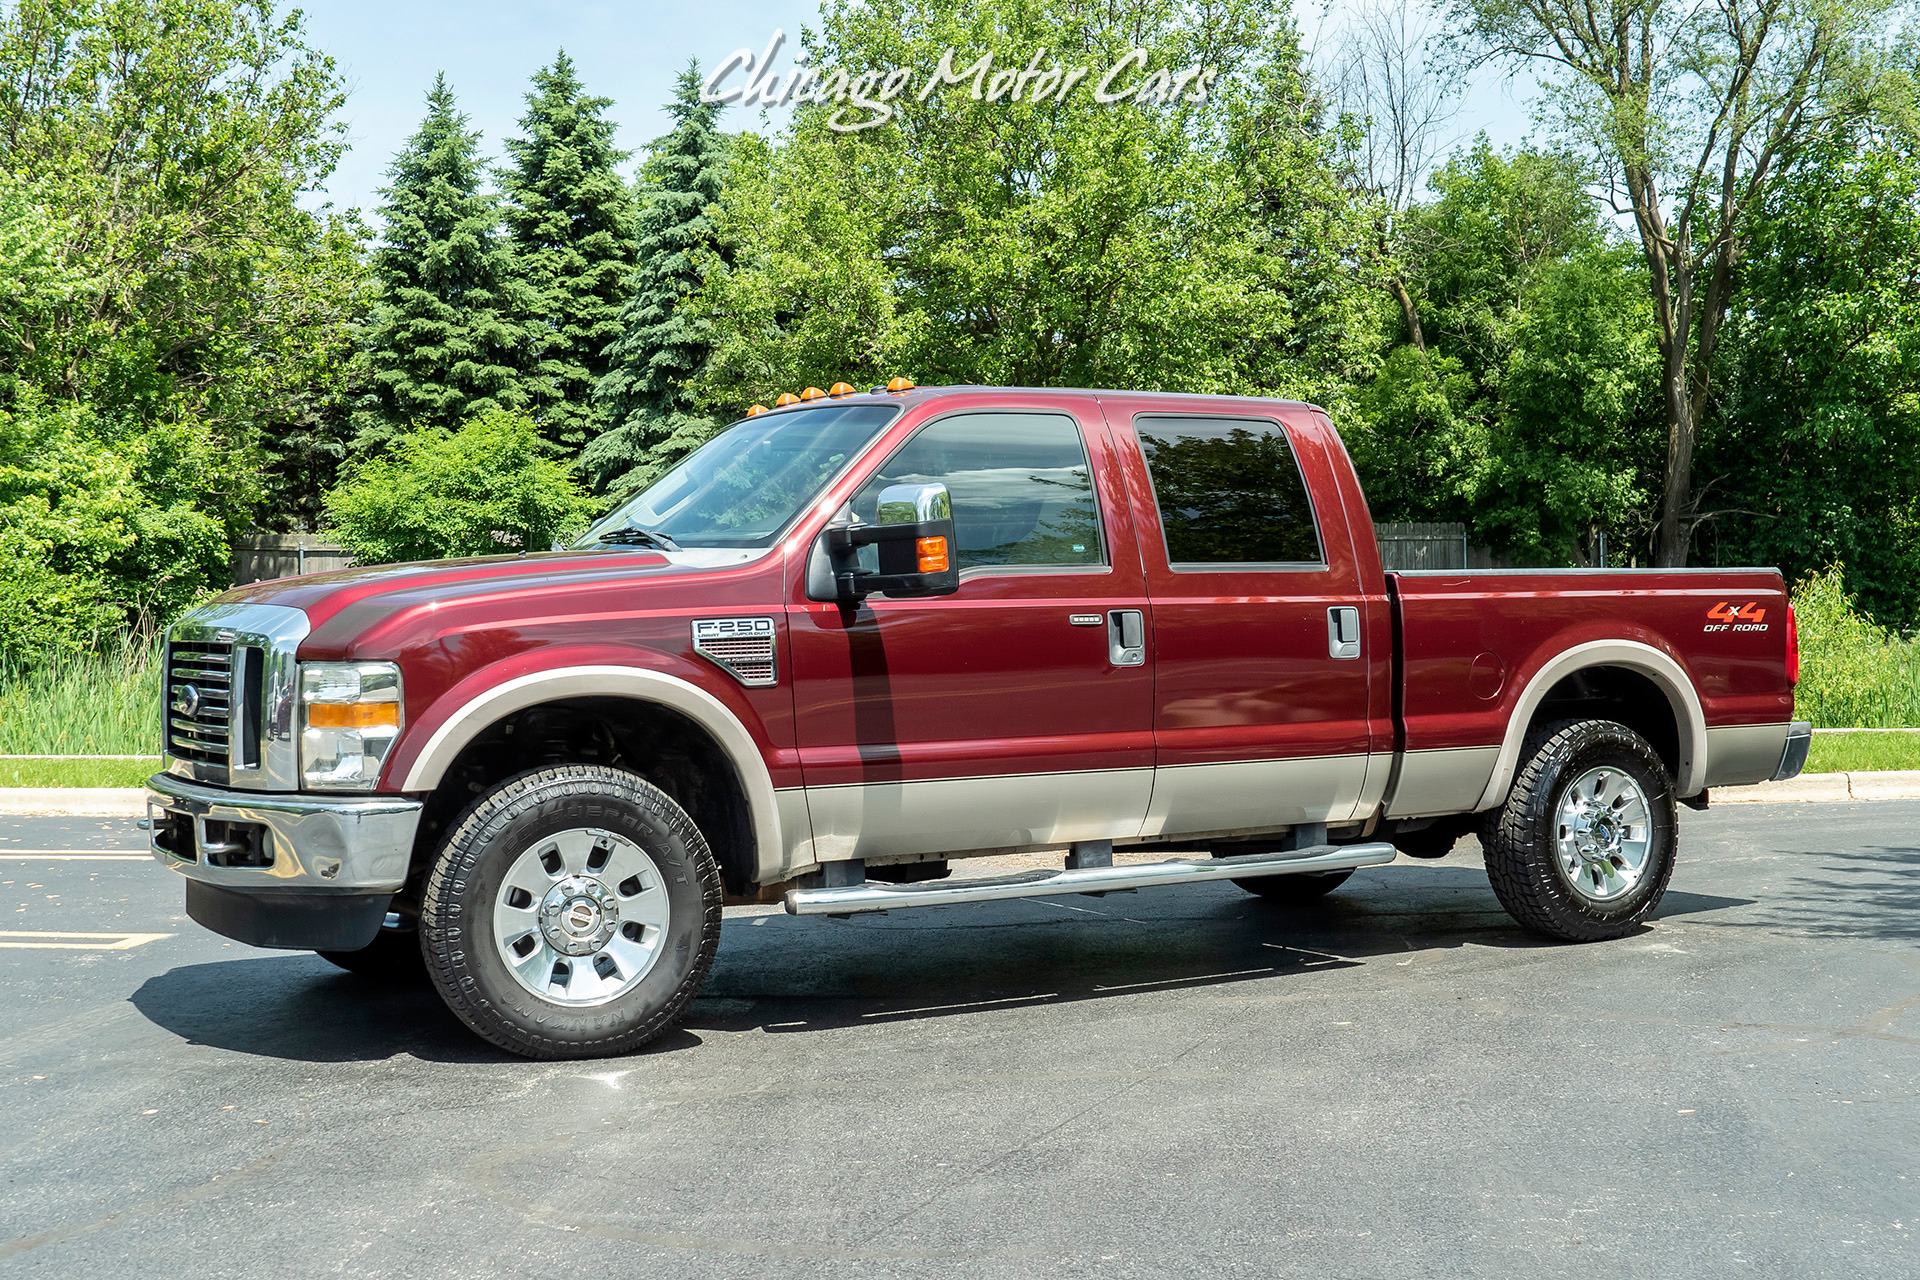 Used 2008 Ford Super Duty F-250 SRW Lariat Pickup-Truck LOADED! 6.4L TURBO  DIESEL! For Sale ($14,800) | Chicago Motor Cars Stock #15673